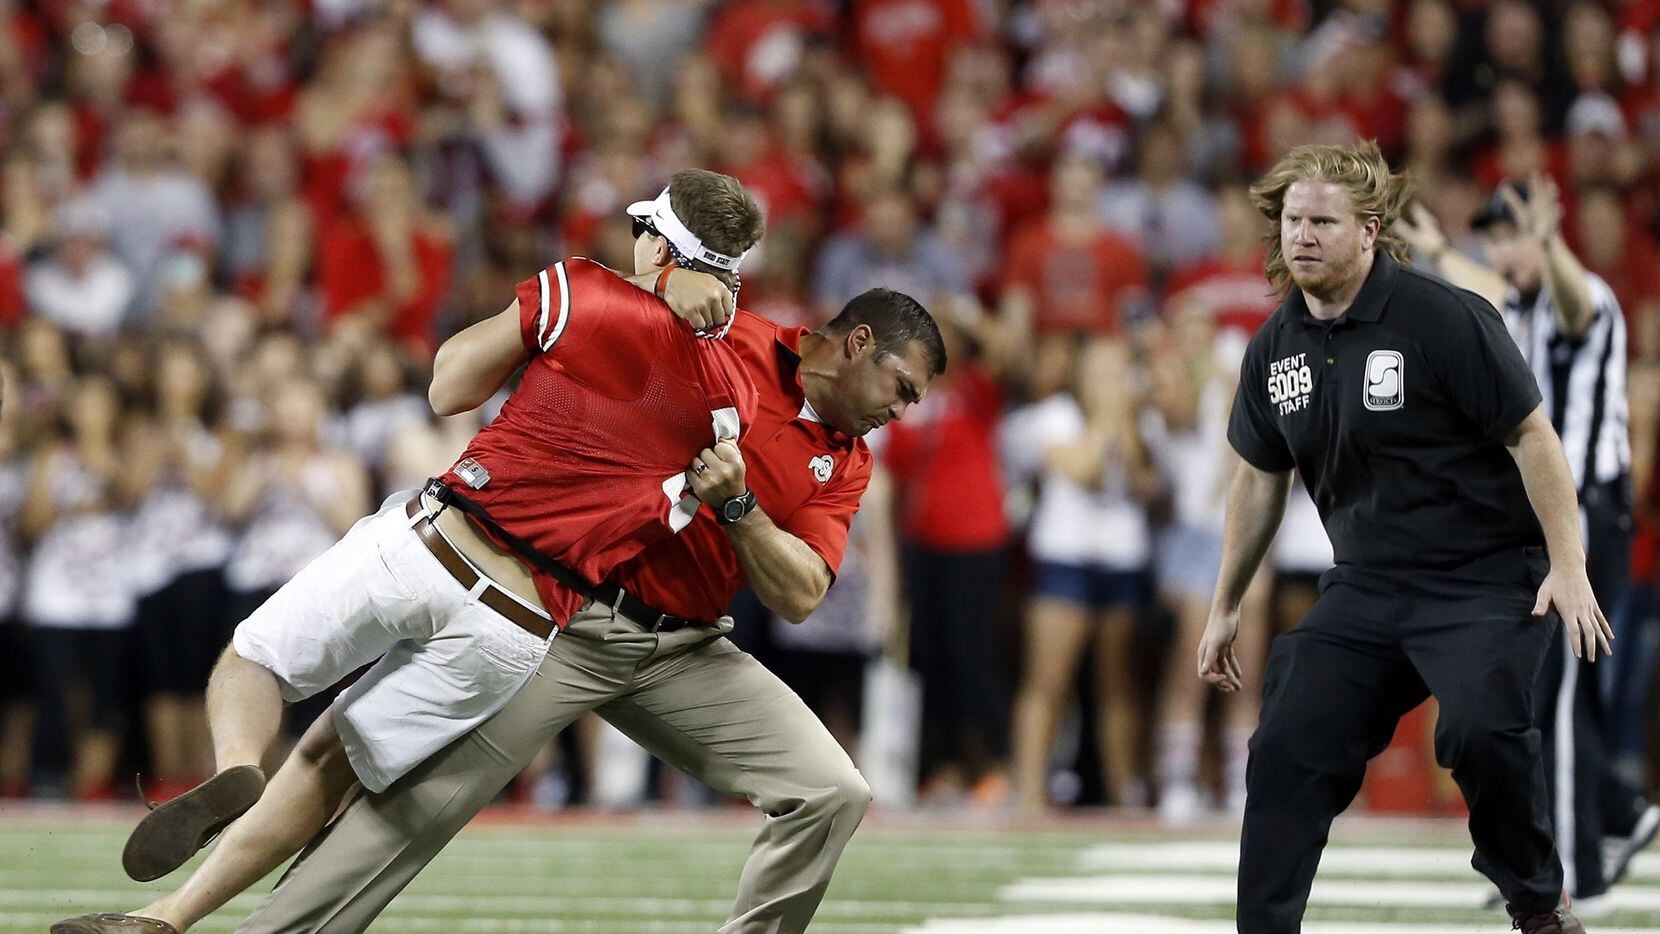 Introducir 31+ imagen coach tackles player from sideline ohio state